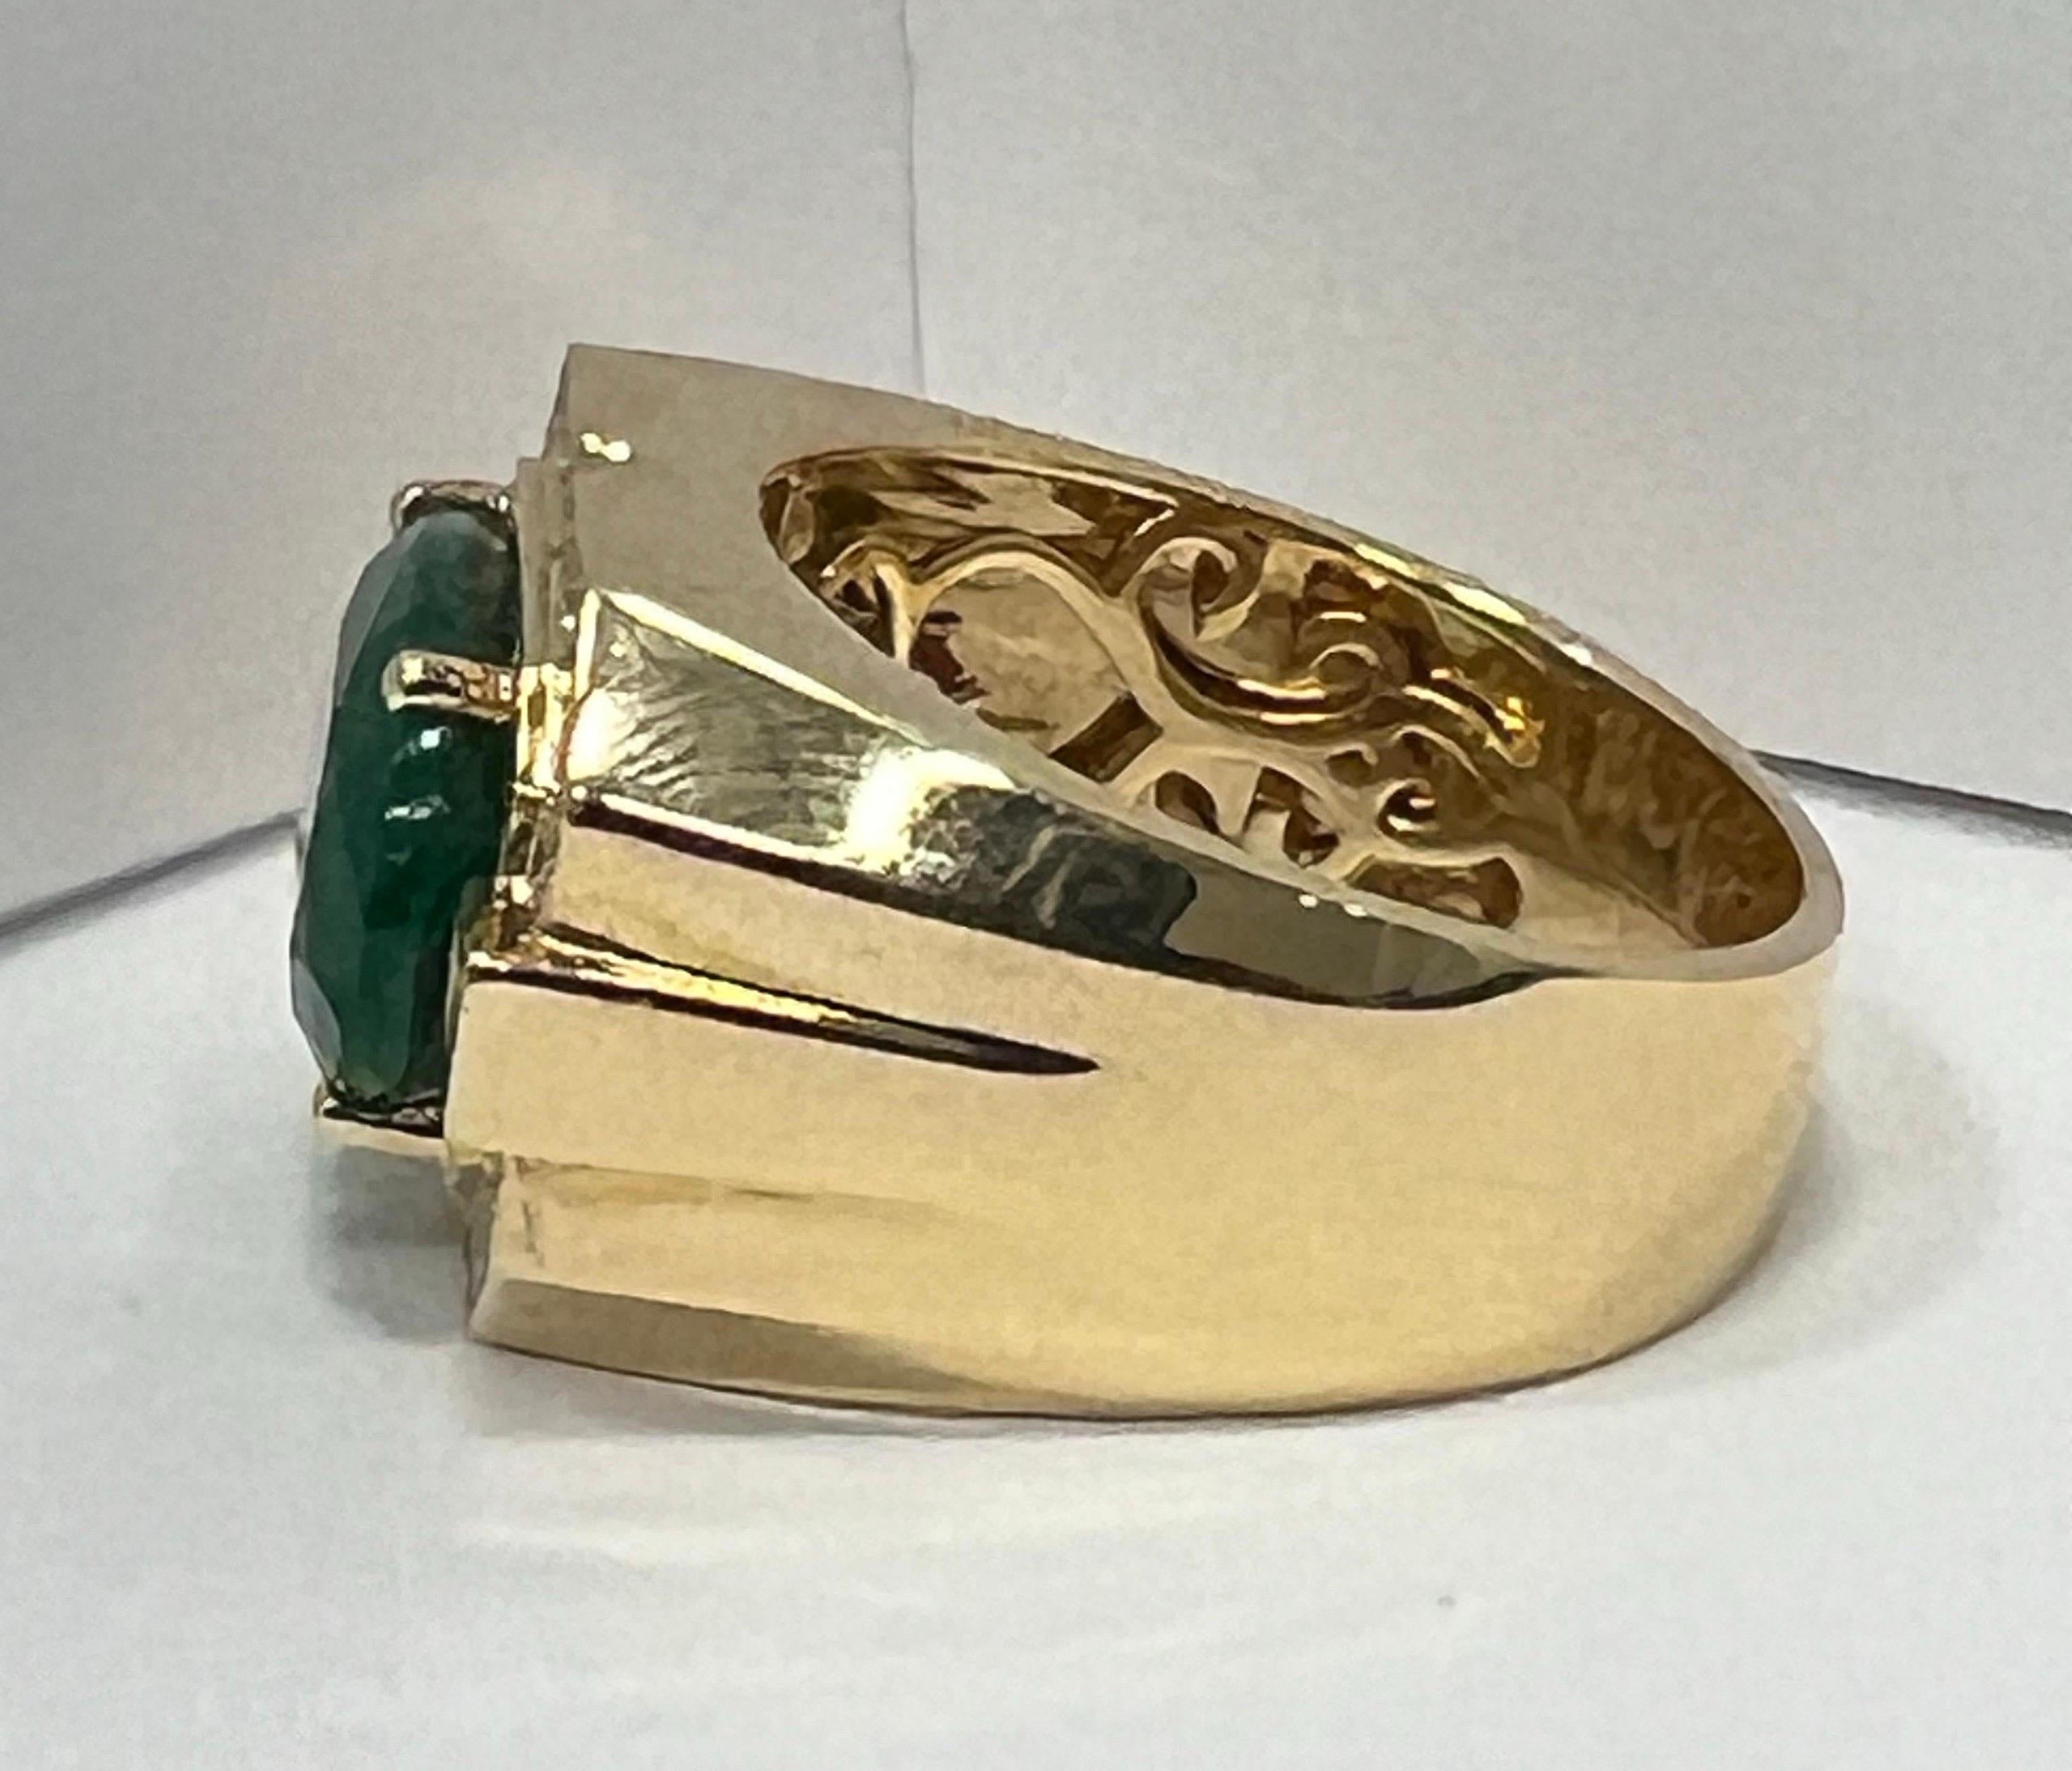 The Ring is Mens Ring set in 18k yellow gold with Accents of white diamonds 0.38 carat. Diamonds are multi shape. The Ring is currently 11 but can be resized plus minus 2 sizes down or up easily. Emerald is very clean and what you see in the stone